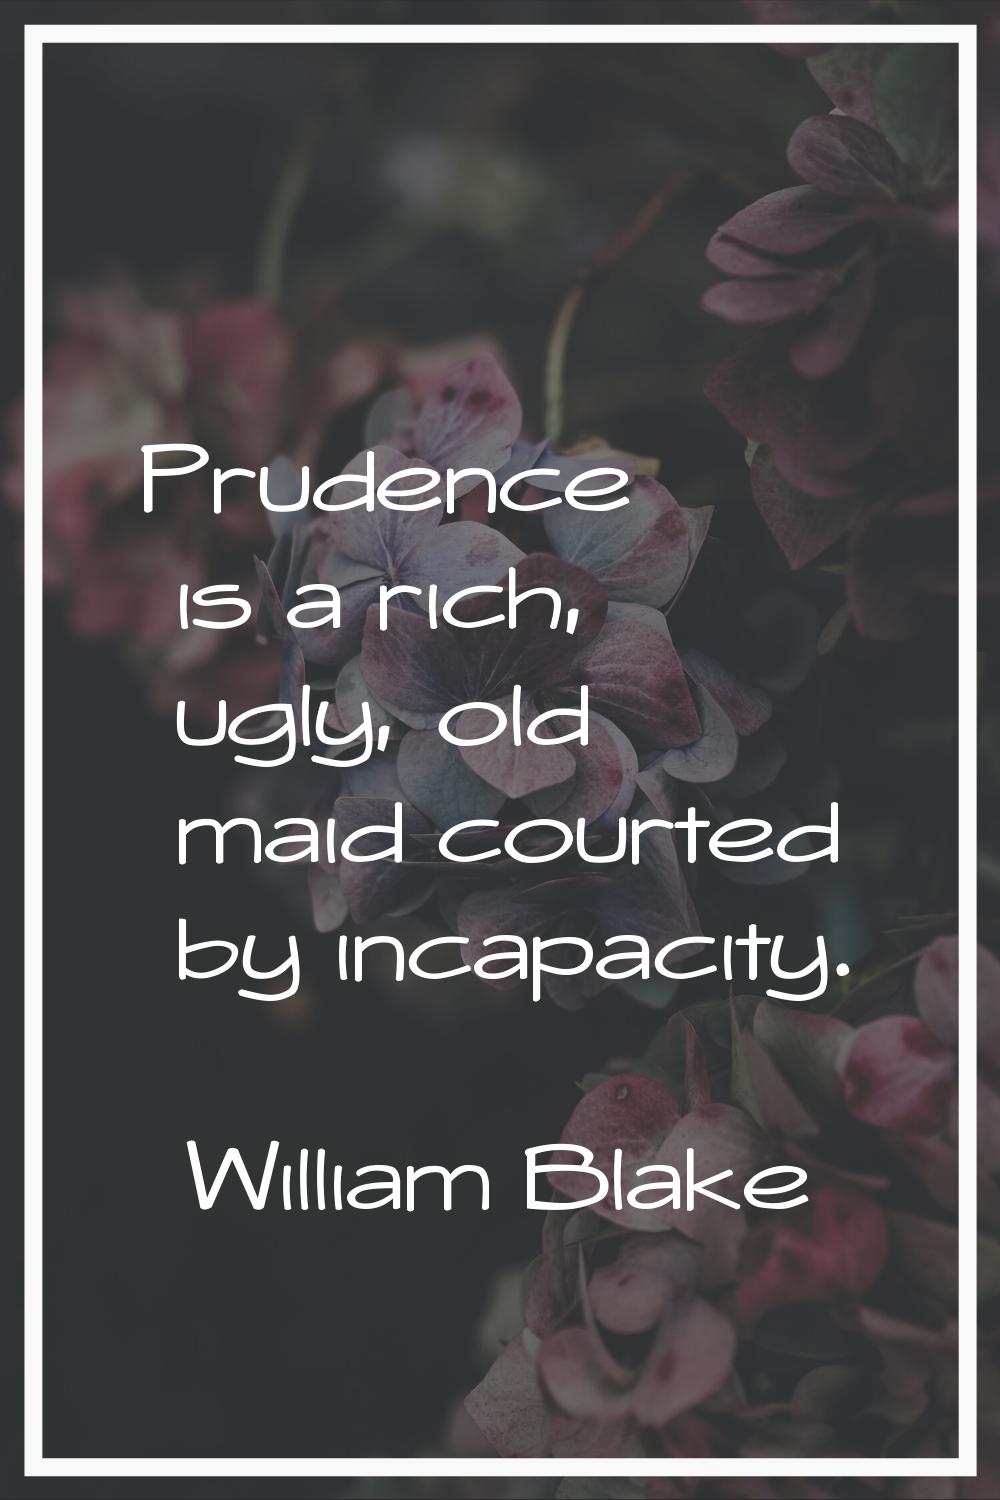 Prudence is a rich, ugly, old maid courted by incapacity.